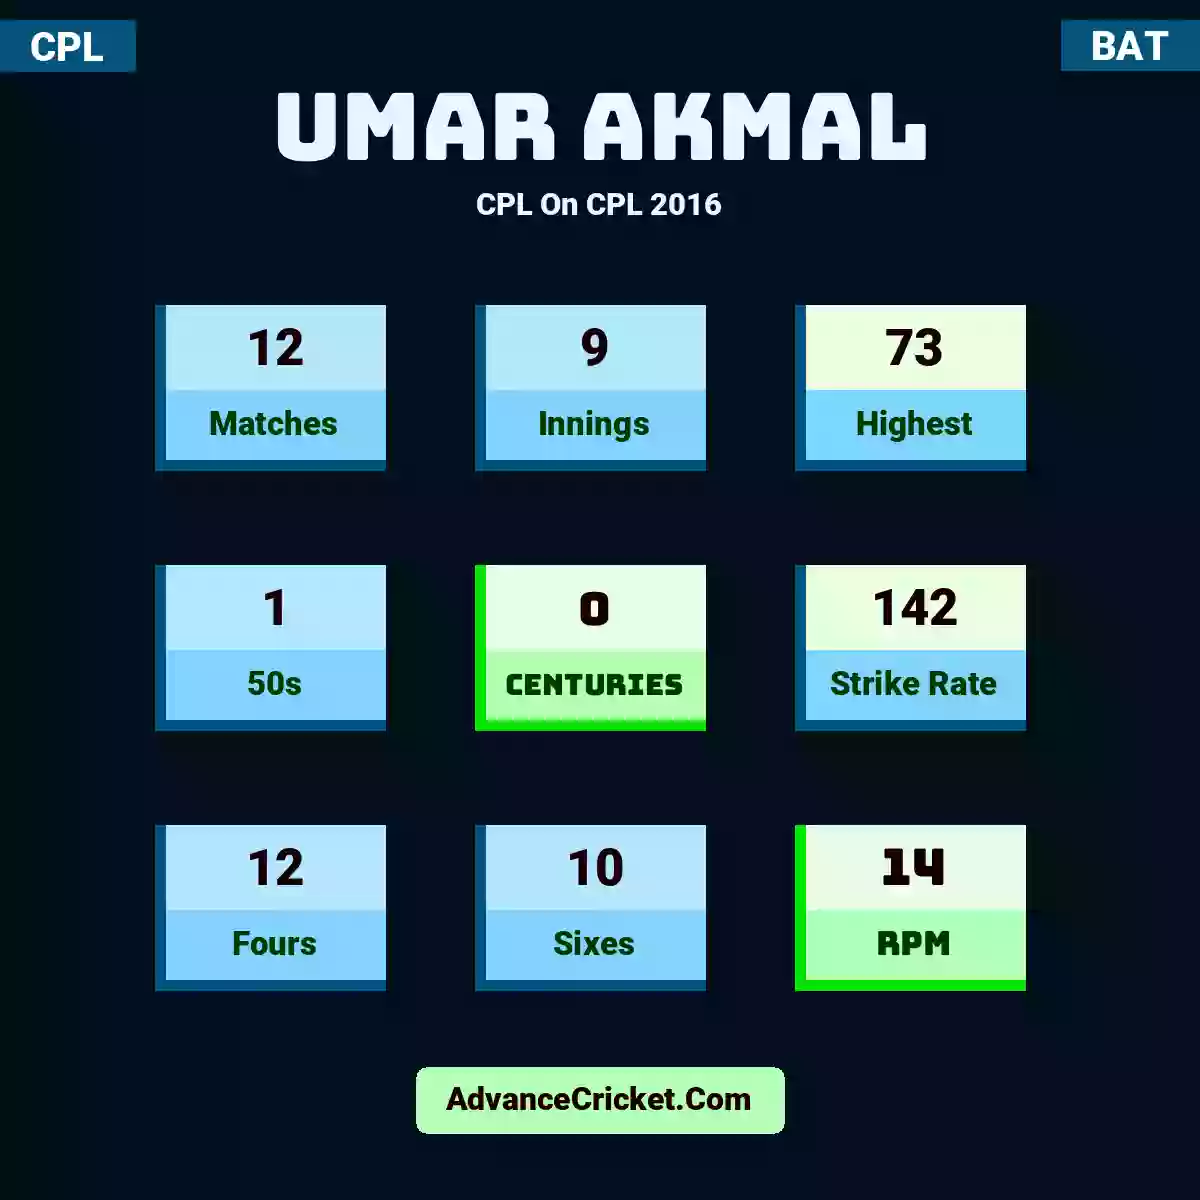 Umar Akmal CPL  On CPL 2016, Umar Akmal played 12 matches, scored 73 runs as highest, 1 half-centuries, and 0 centuries, with a strike rate of 142. U.Akmal hit 12 fours and 10 sixes, with an RPM of 14.